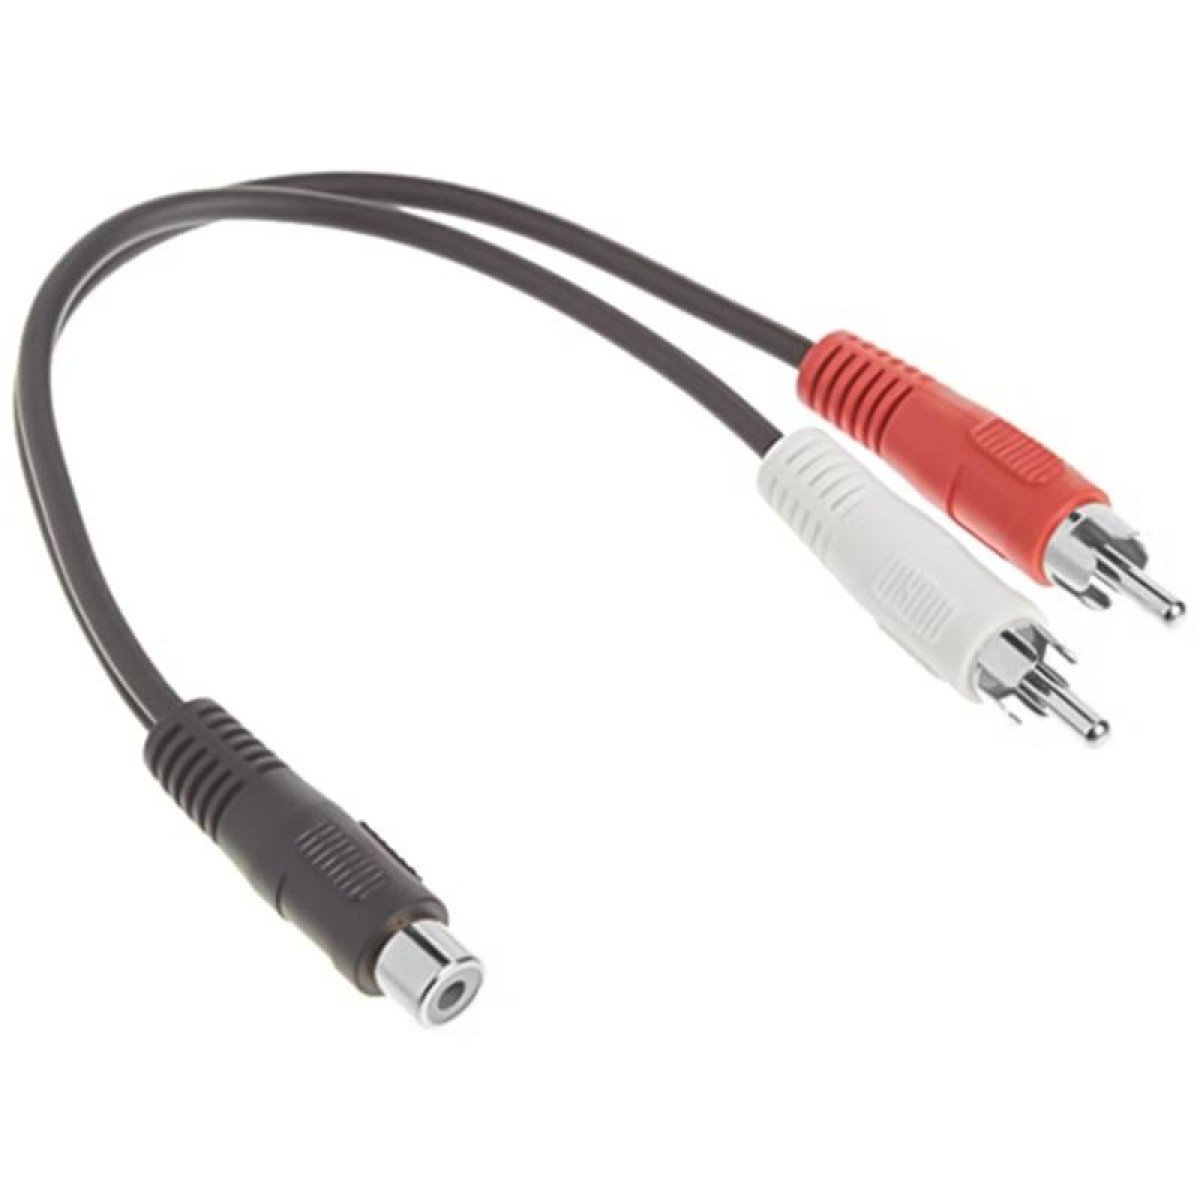 3.5mm female stereo jack to 2 male RCA plugs cable, Length: 38cm